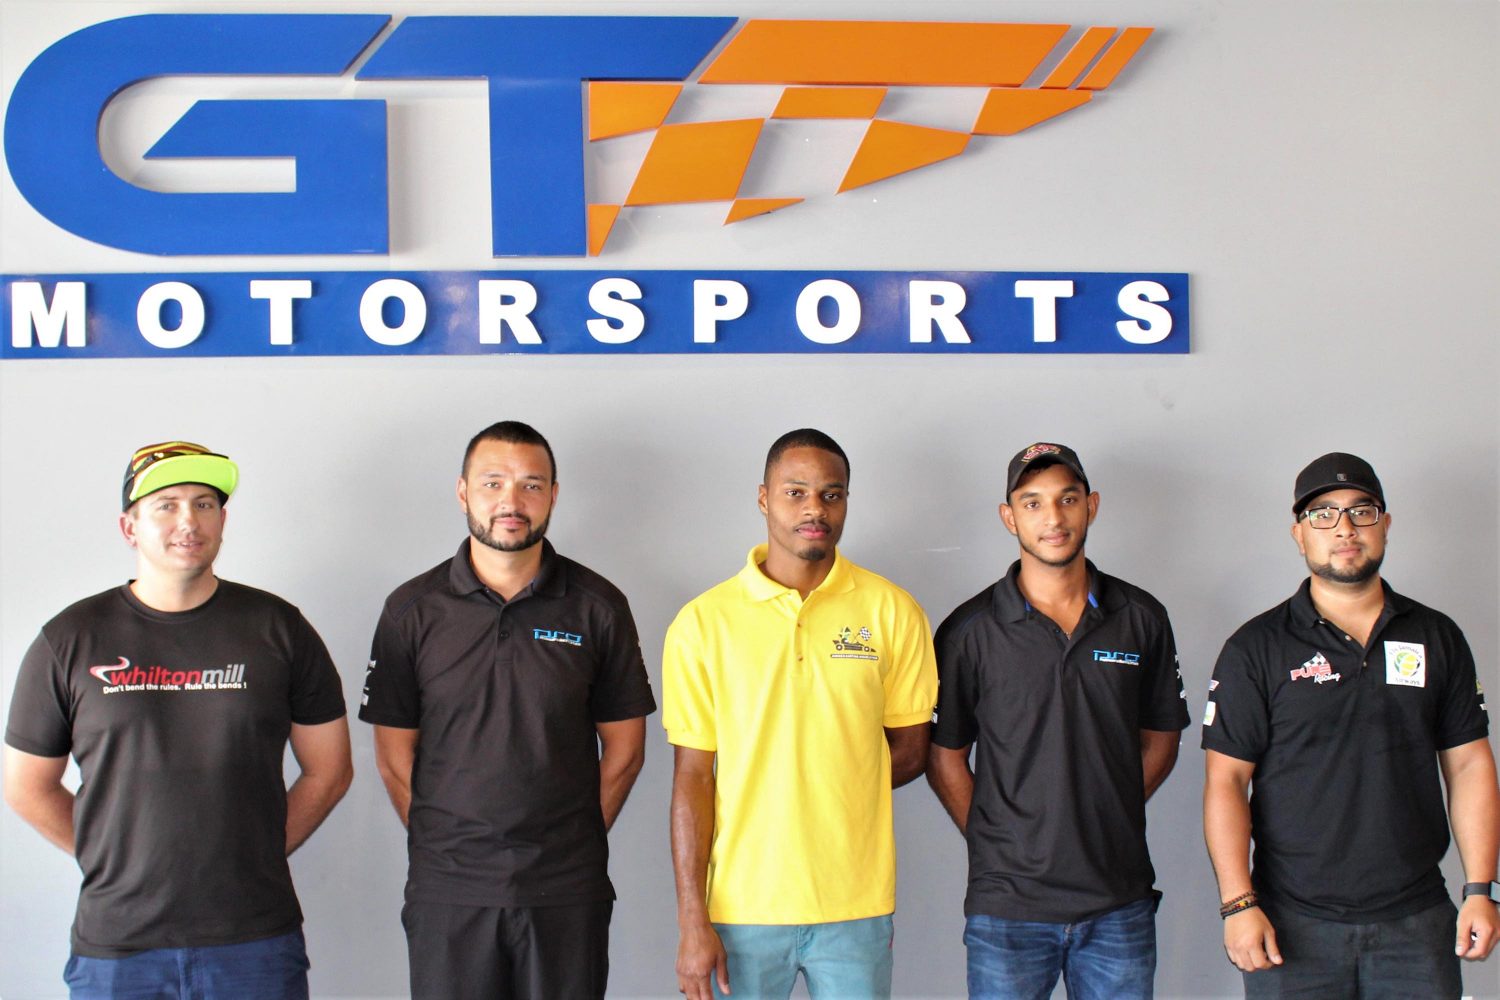 Shifter Pro Cup competitors, from left: Orry Hunte, Darryl Timmers, Collin Daley Jr., Kristian Jeffrey and Stefan Jeffrey